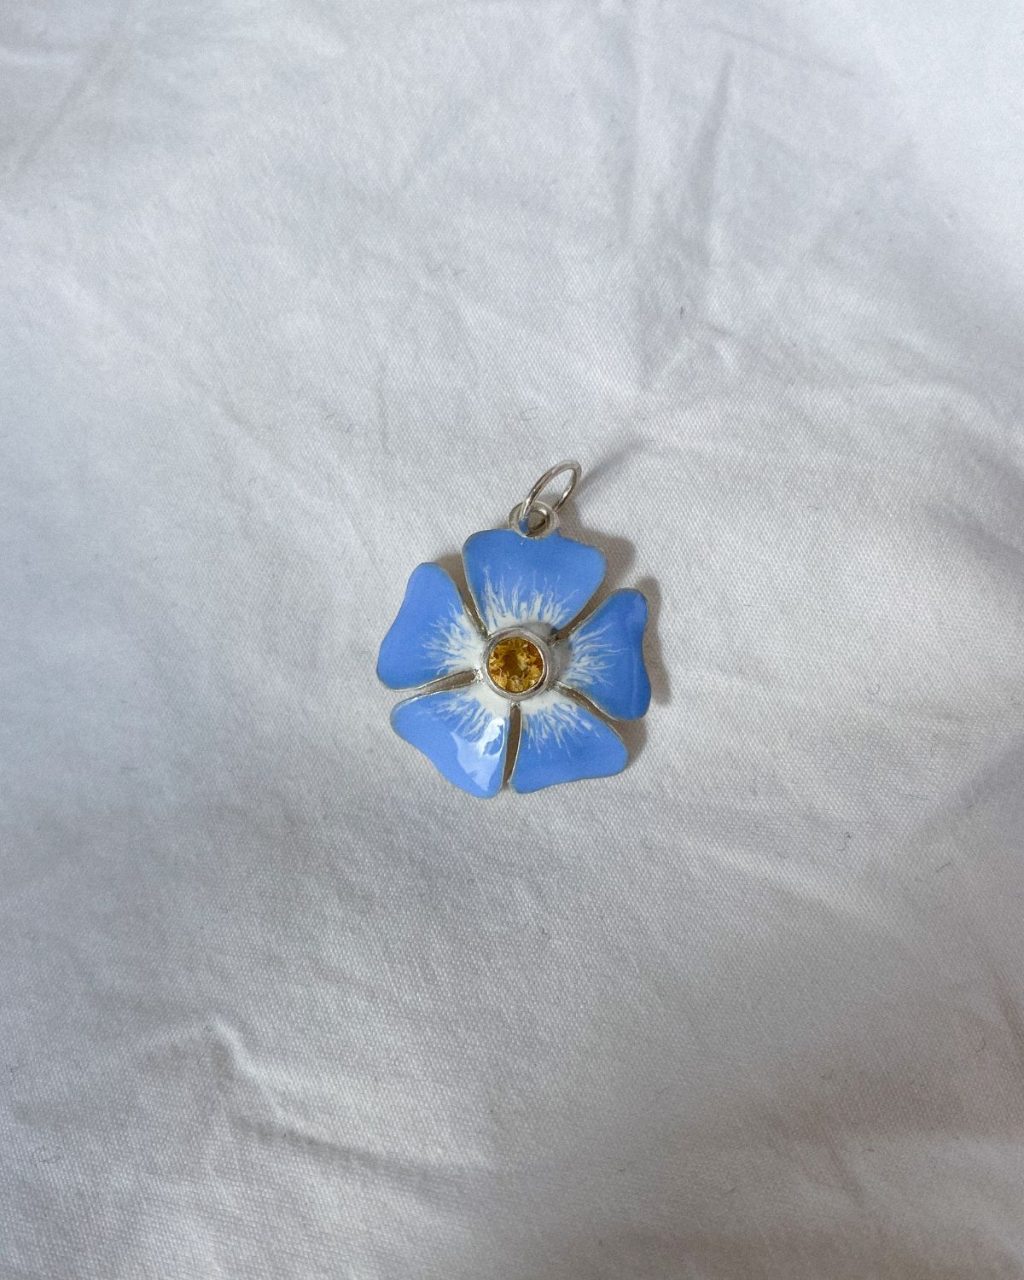 Forget-me-not pendant